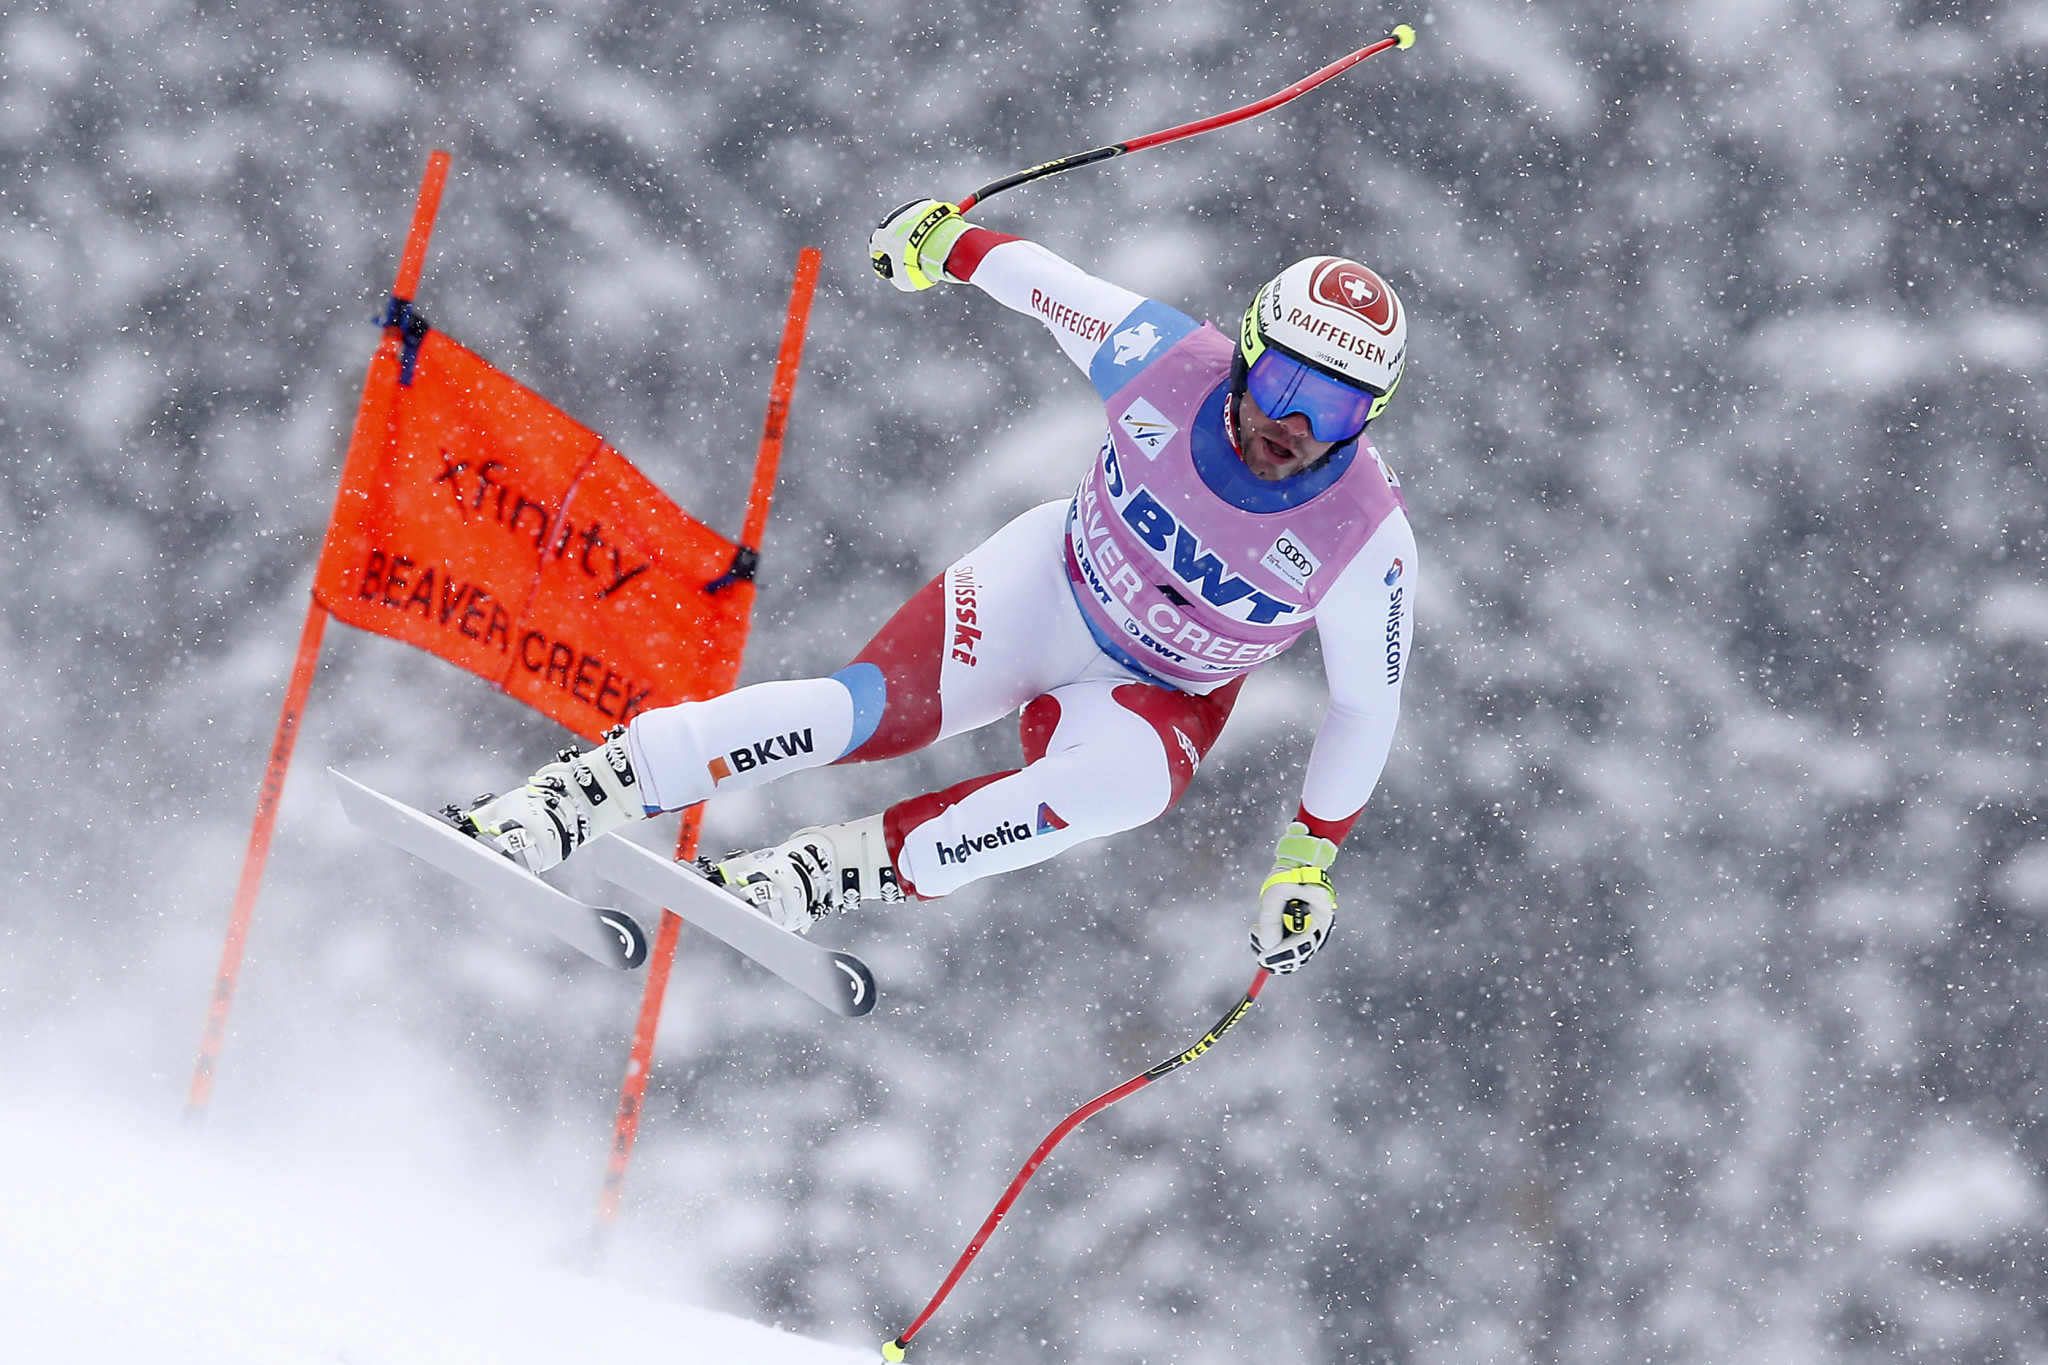 Feuz and Schmidhofer triumph as FIS Alpine Skiing World Cup season resumes